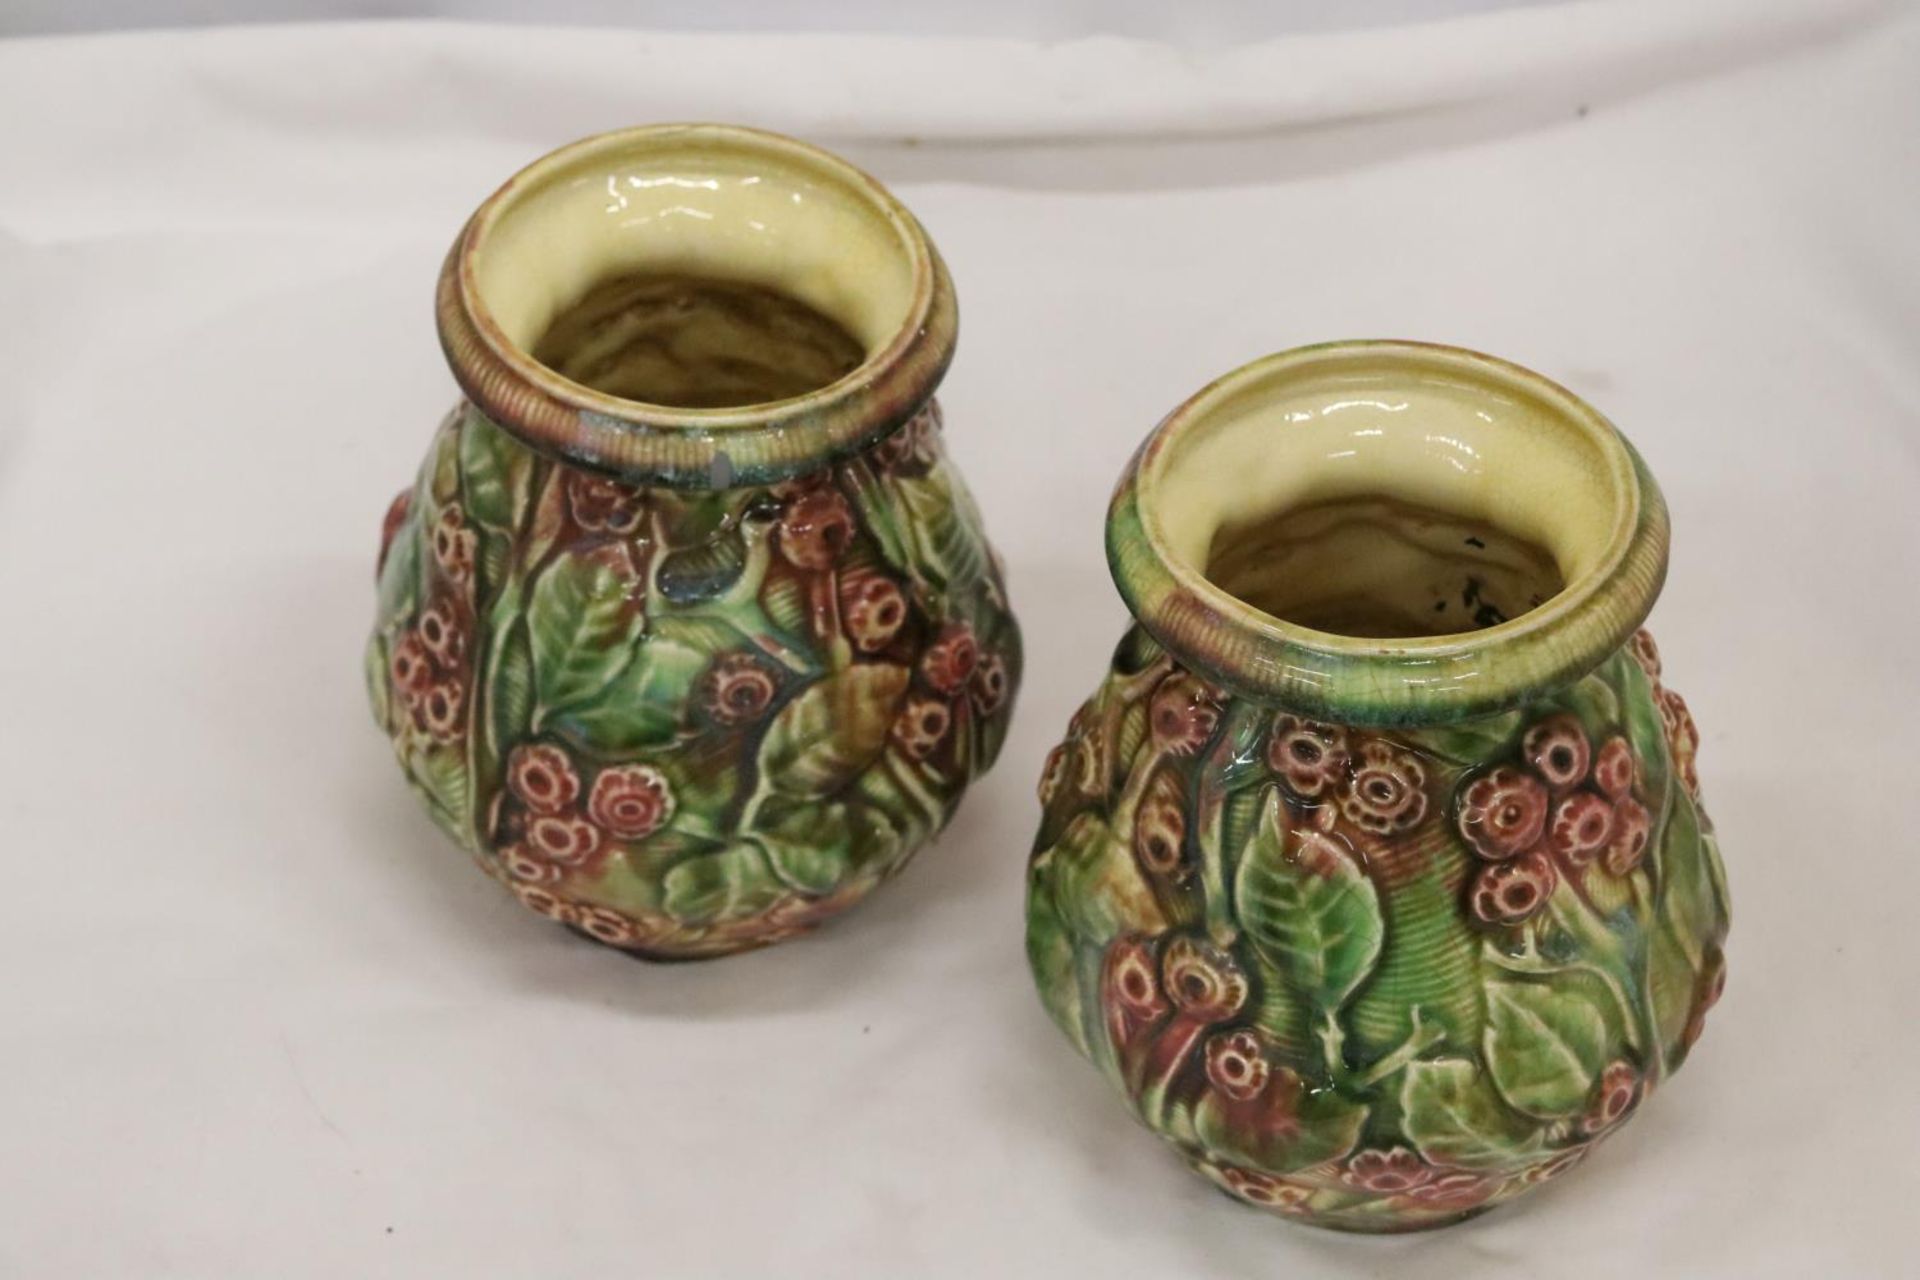 TWO ANTIQUE FLORAL PLANTERS/VASES - Image 3 of 4